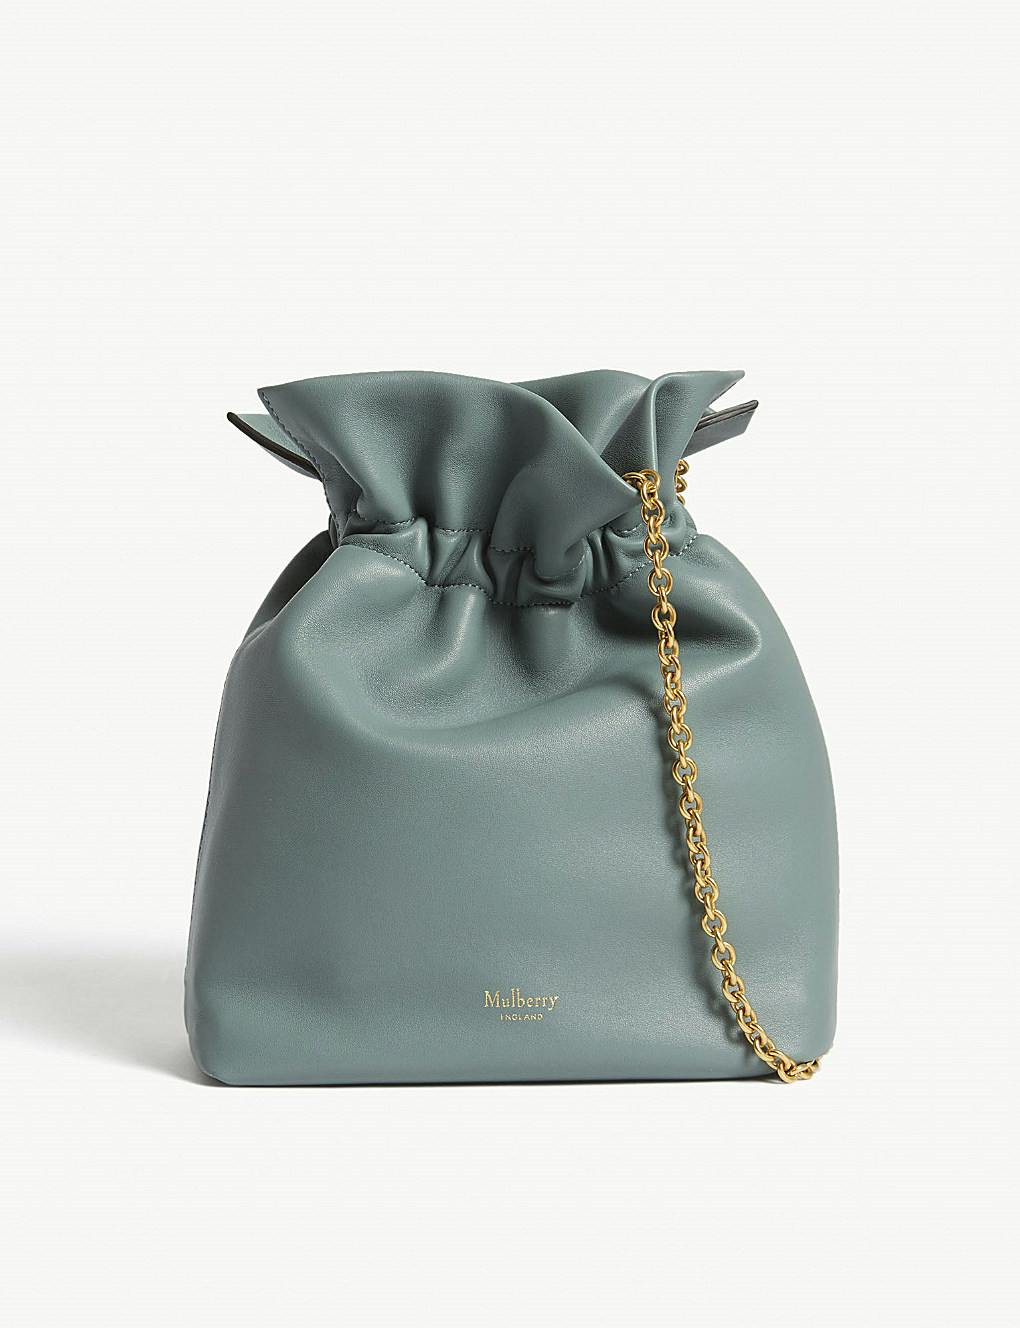 15 of the best bucket bags to shop right now